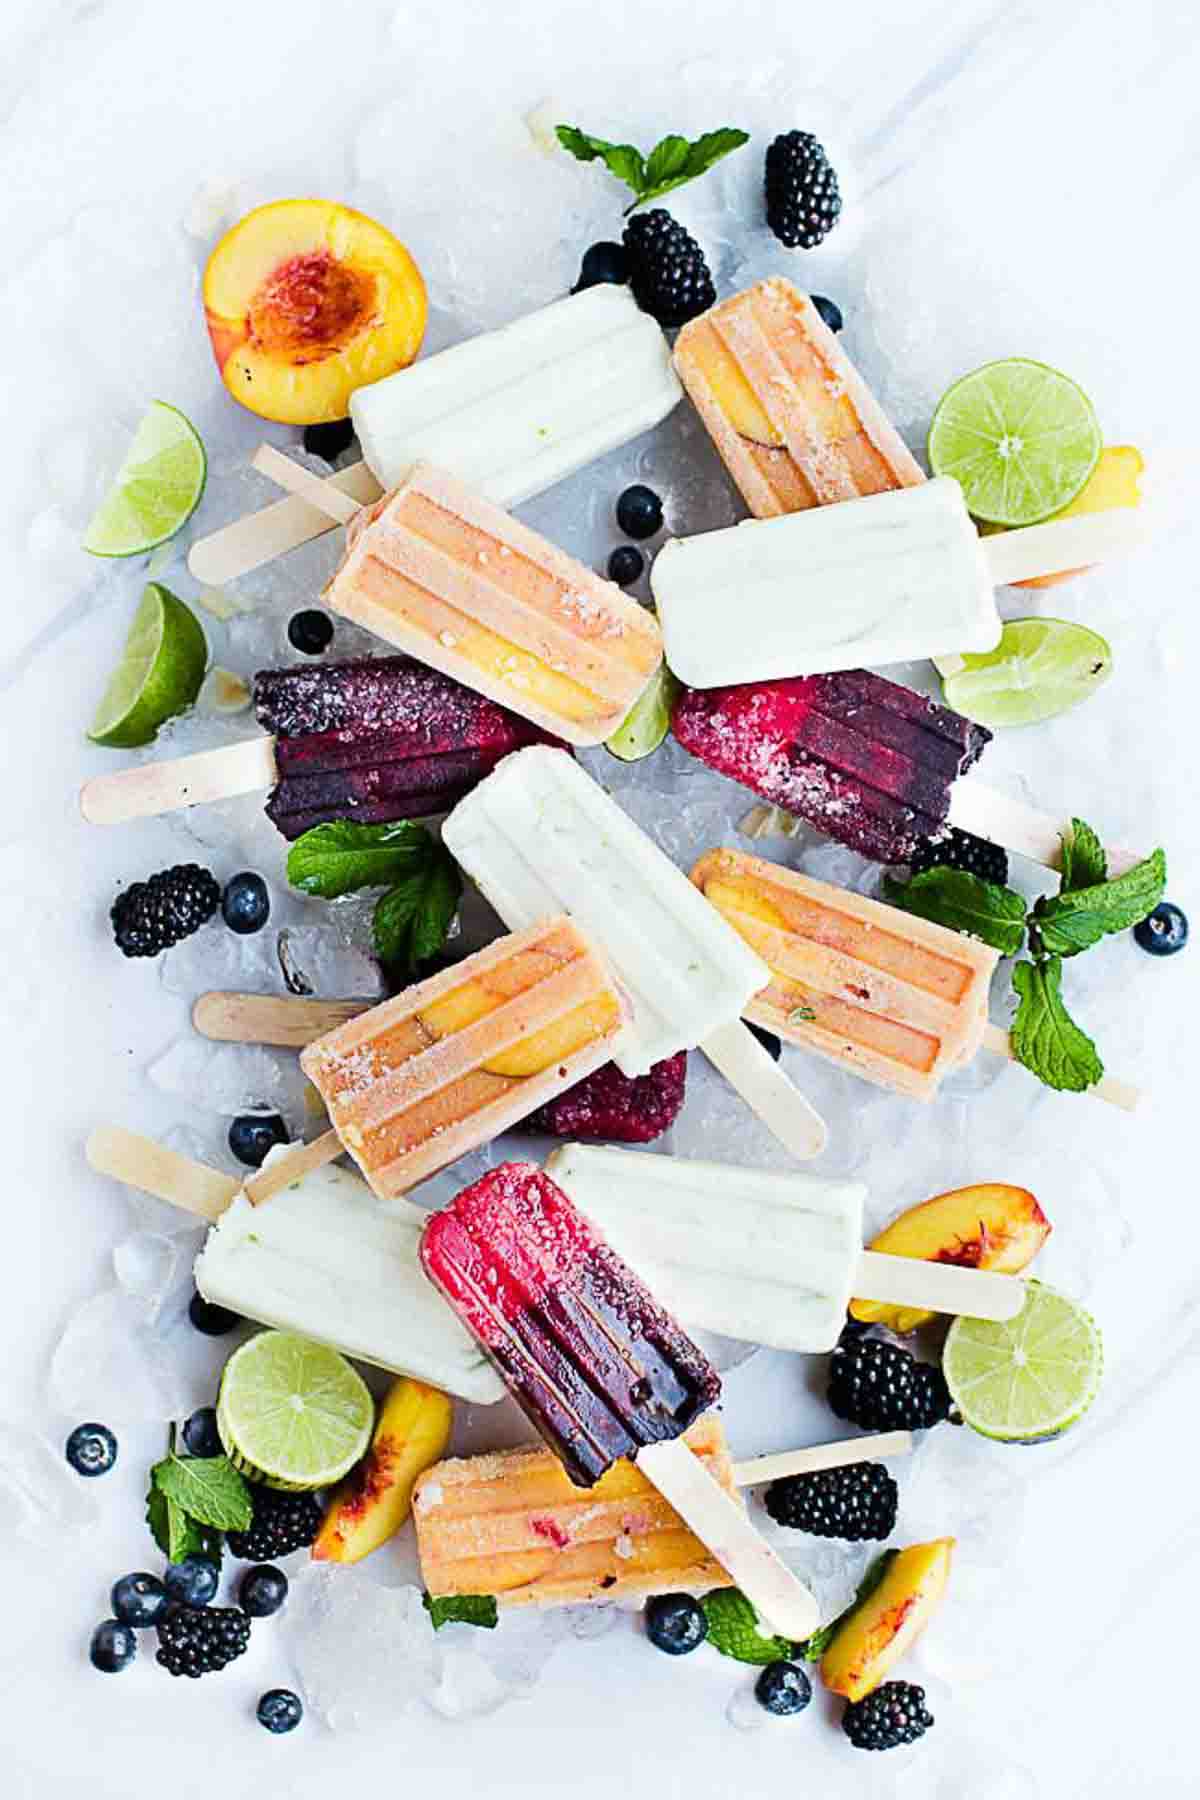 Different flavored fruit popsicles on a marble surface with ice and fresh fruit